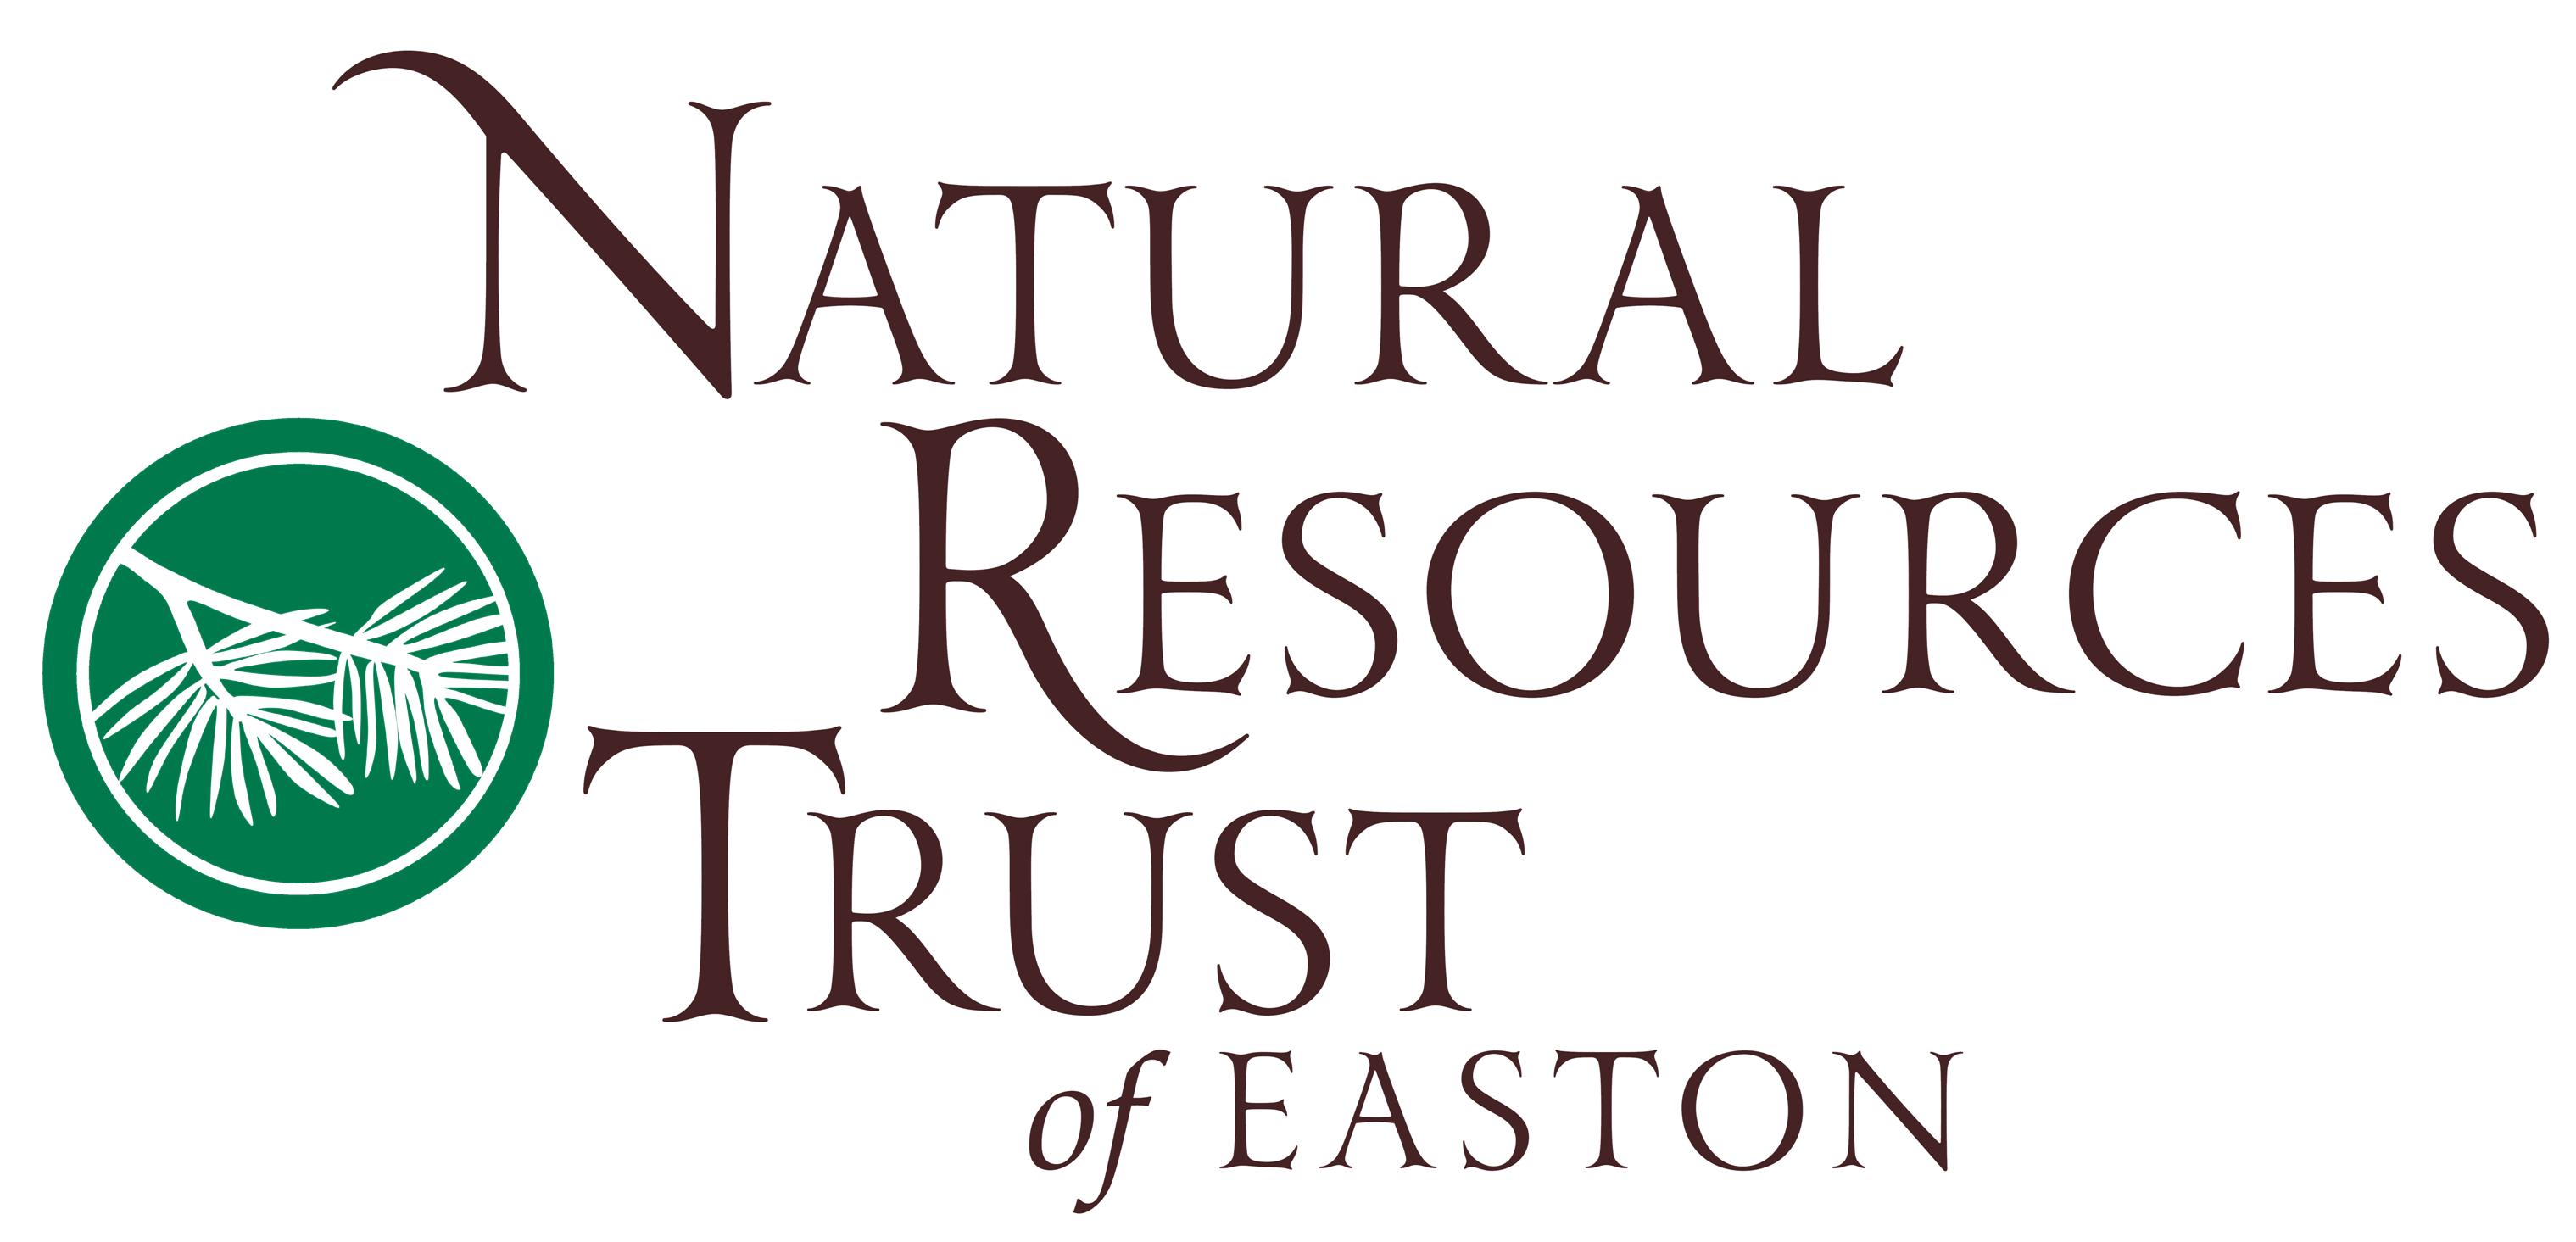 Natural Resources Trust of Easton logo